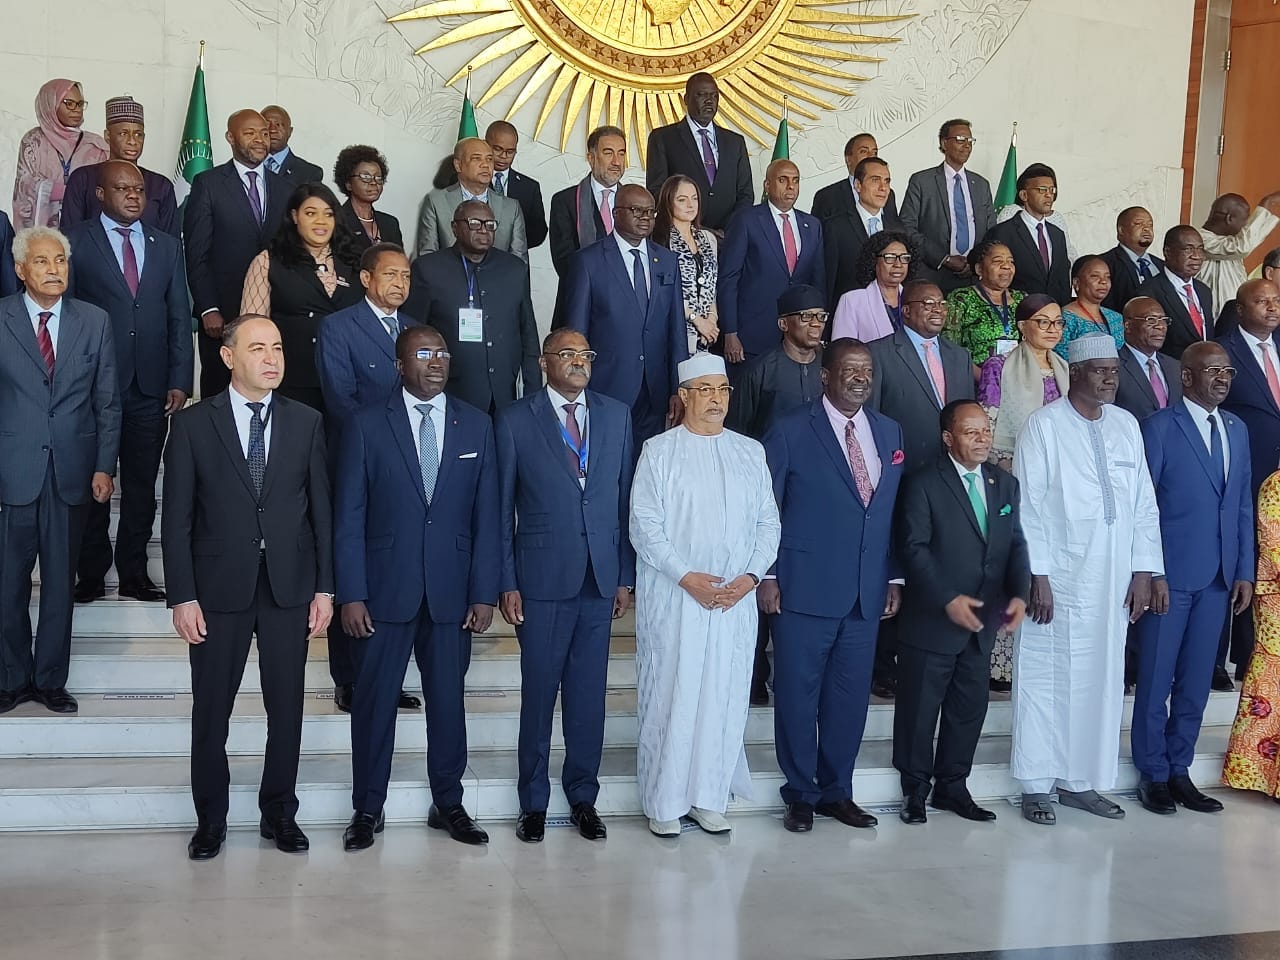 Al-Baour heads the Libyan delegation participating in the 22 special session of the Executive Council of the African Union.